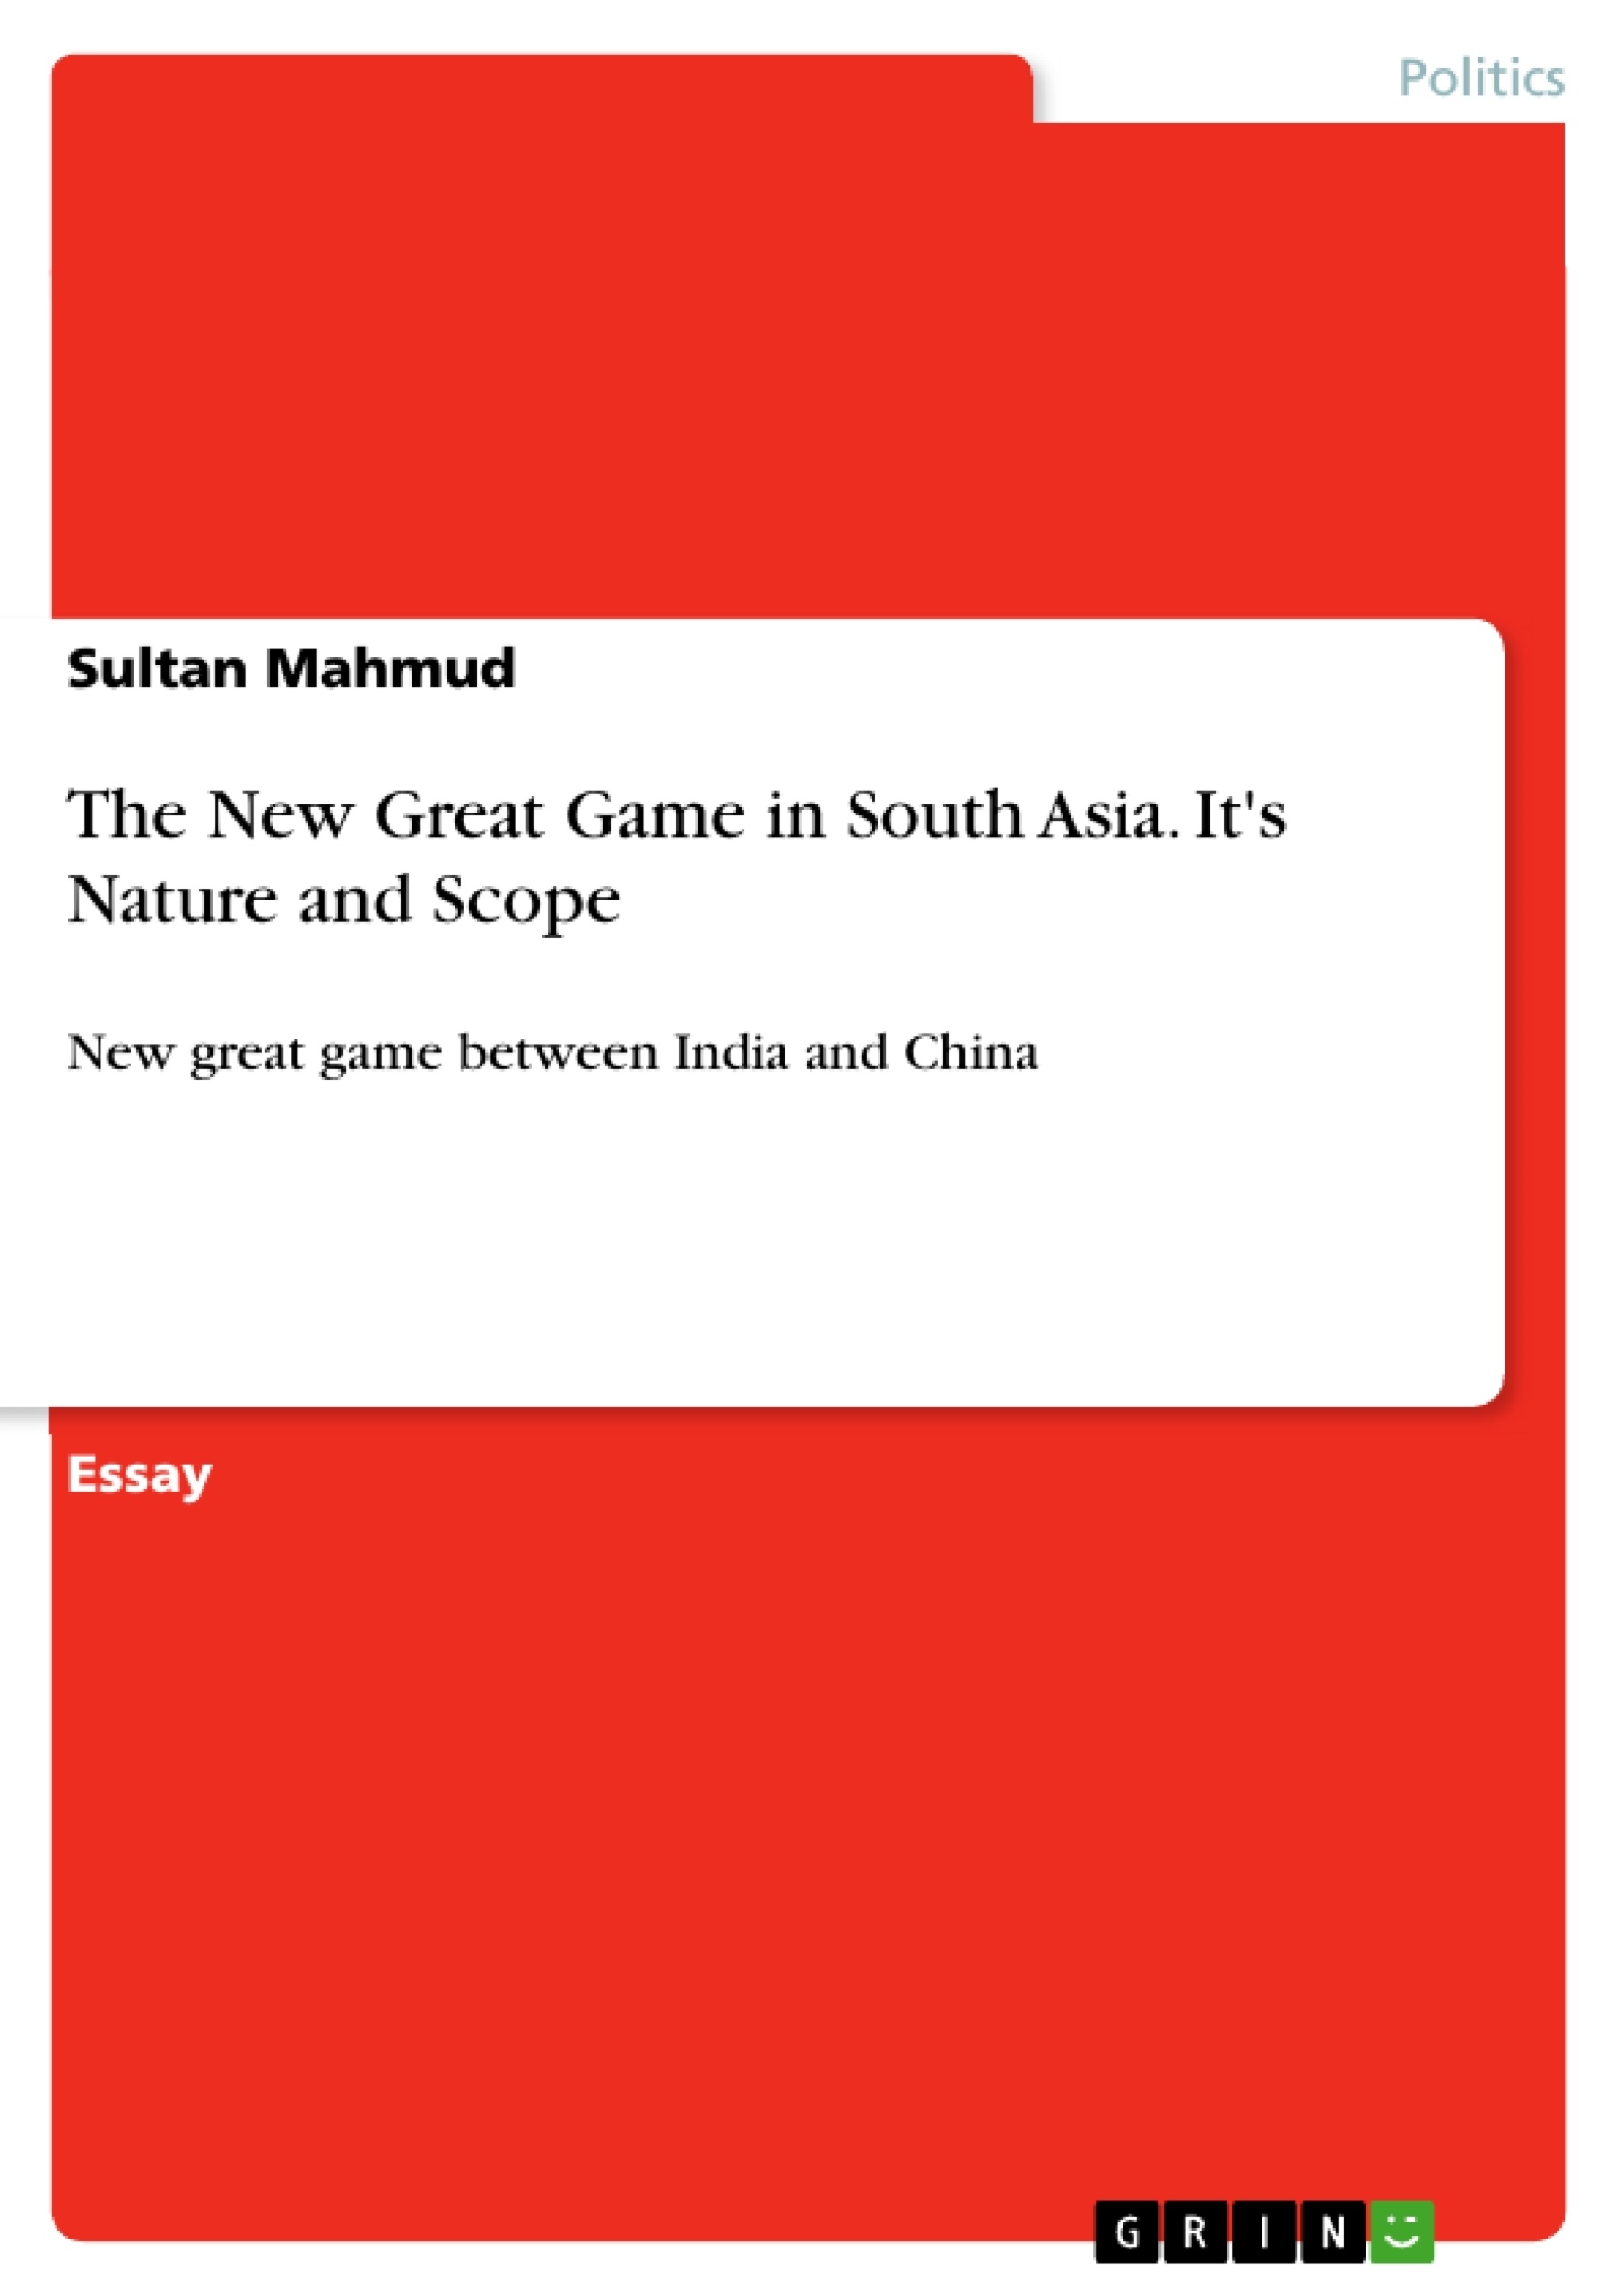 Titre: The New Great Game in South Asia. It's Nature and Scope